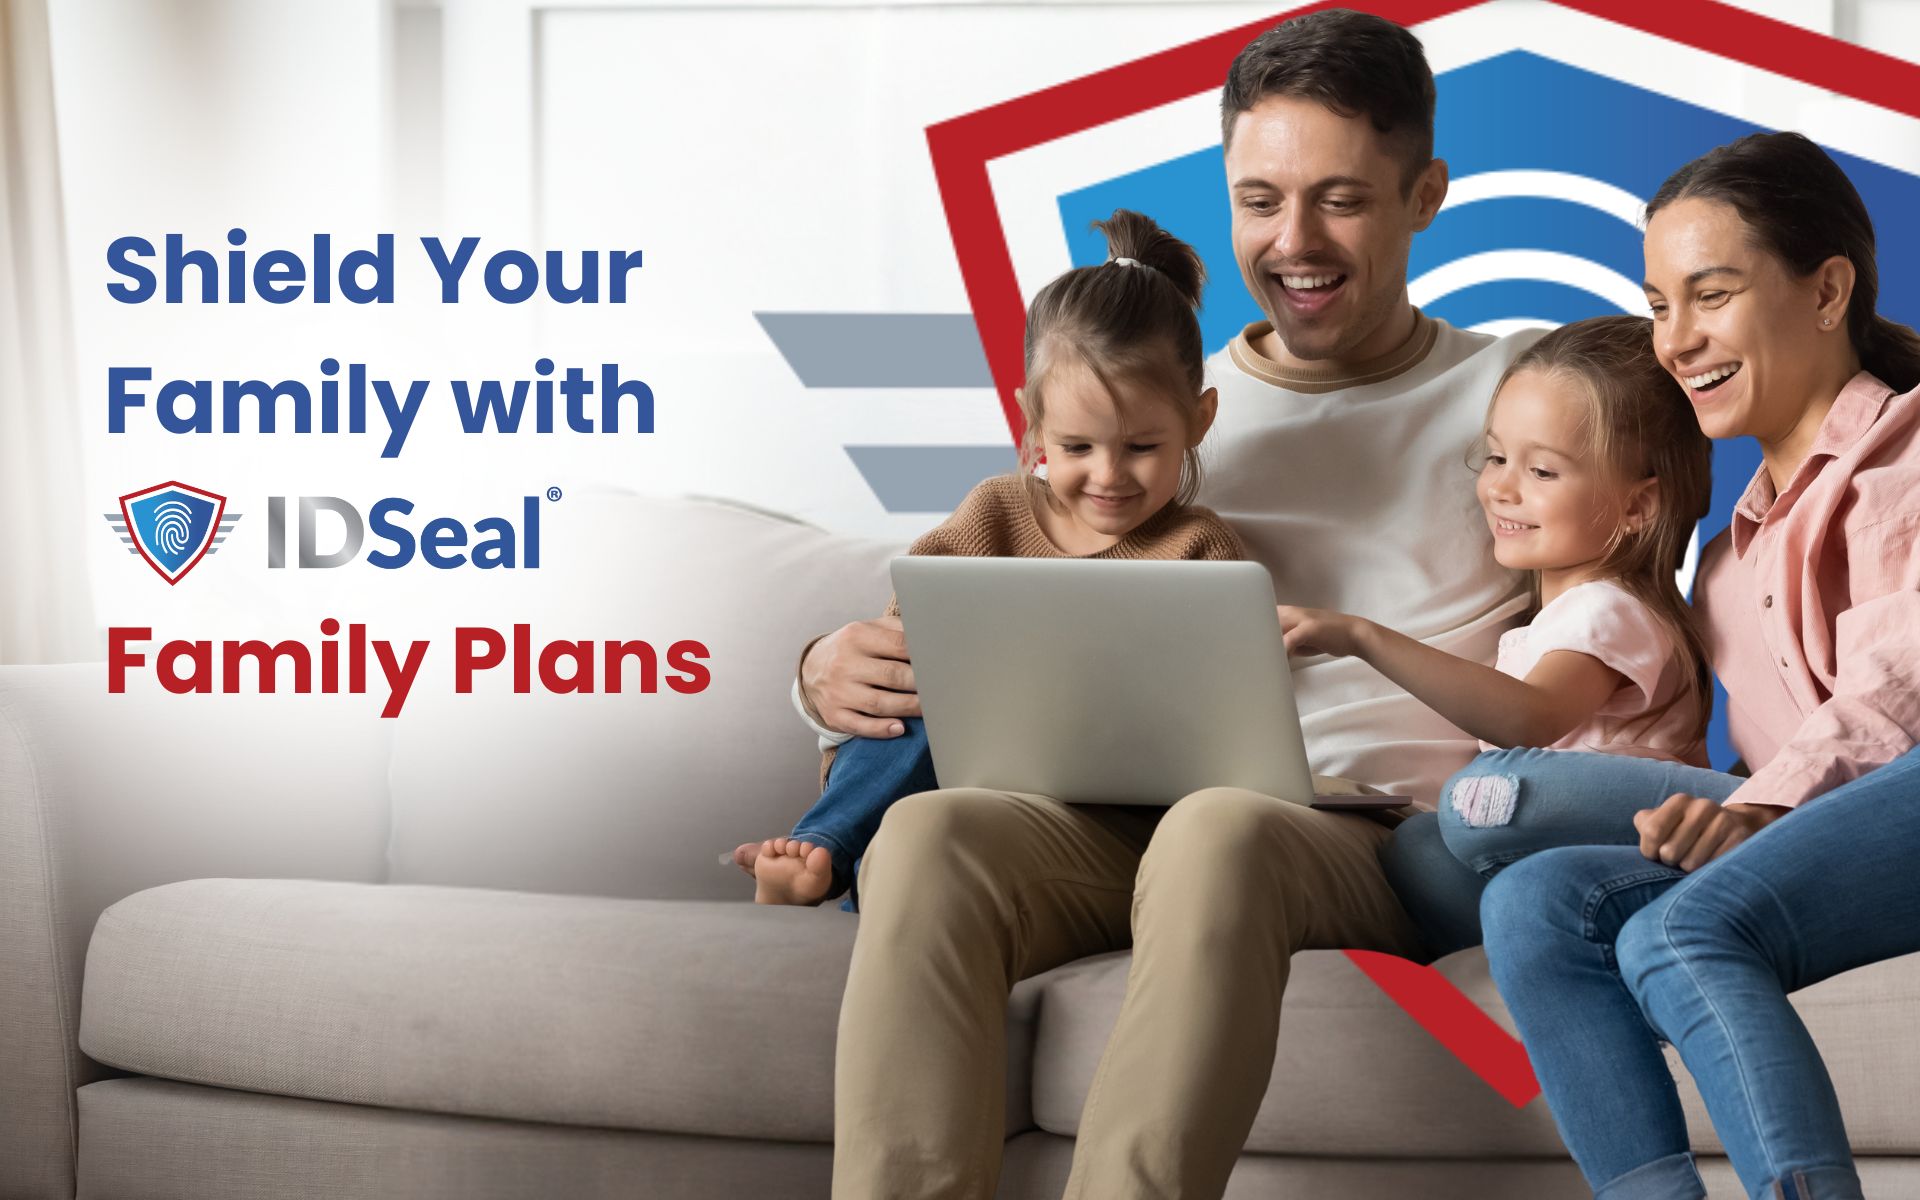 Featured image for “Shield Your Family with IDSeal® Family Plans”